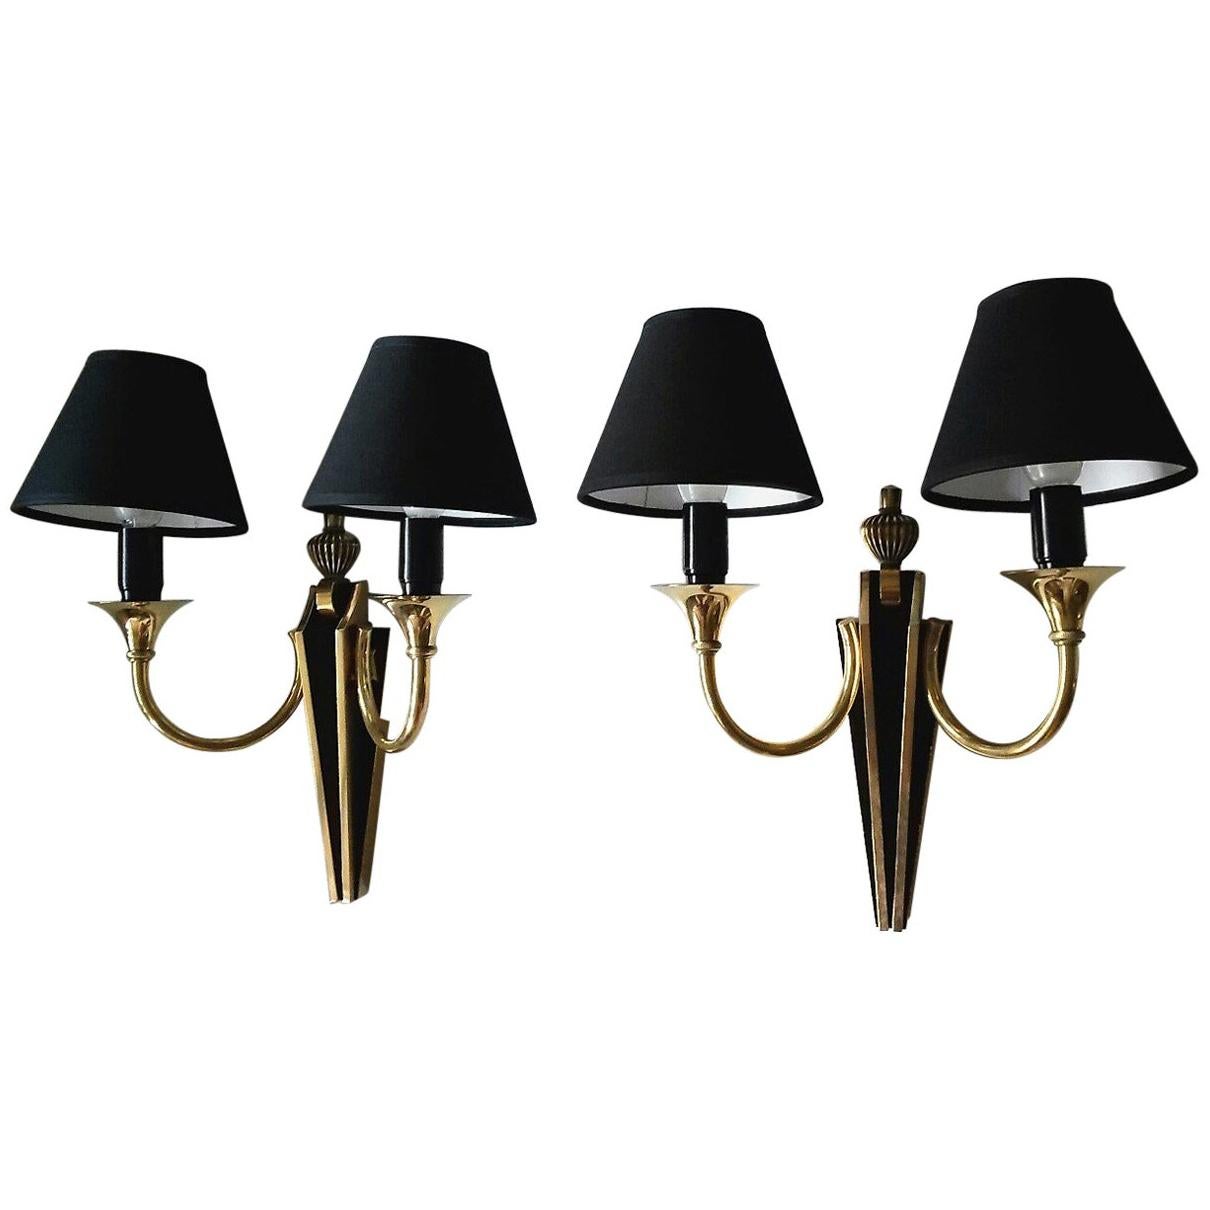 Stunning French Neoclassical Style Pair of Two-Arm Sconces by Maison Jansen For Sale